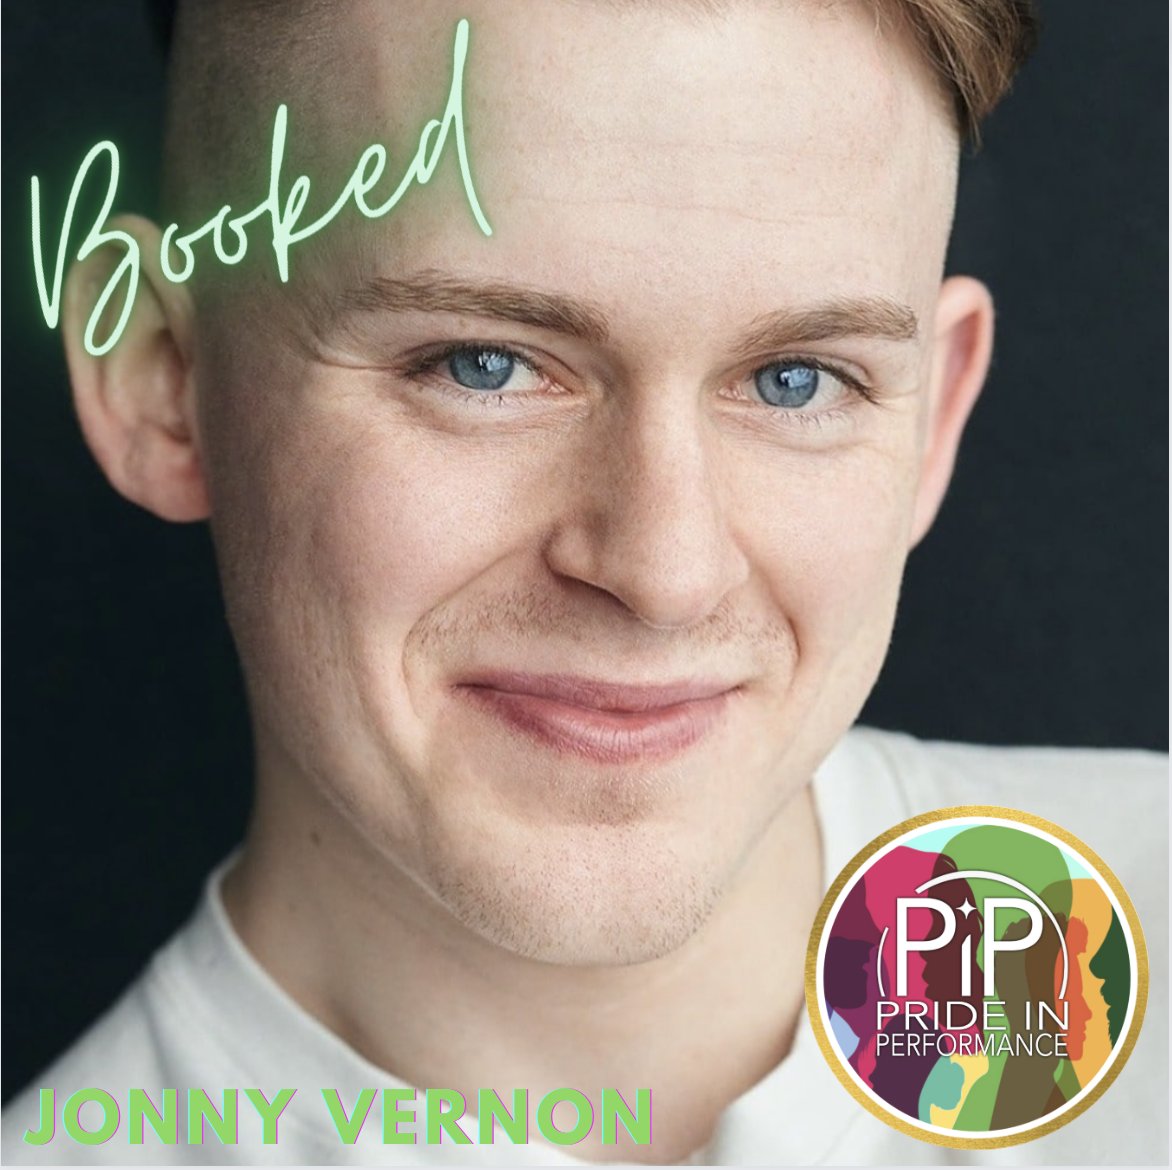 WHO’S A PiPPIN’ PROUD AGENT TODAY? Congratulations JONNY VERNON #Booked a job for a fabulous #Film after a brilliant audition!!! app.spotlight.com/6213-5613-2495 #PositivelyPiP #Casting #ActorsLife